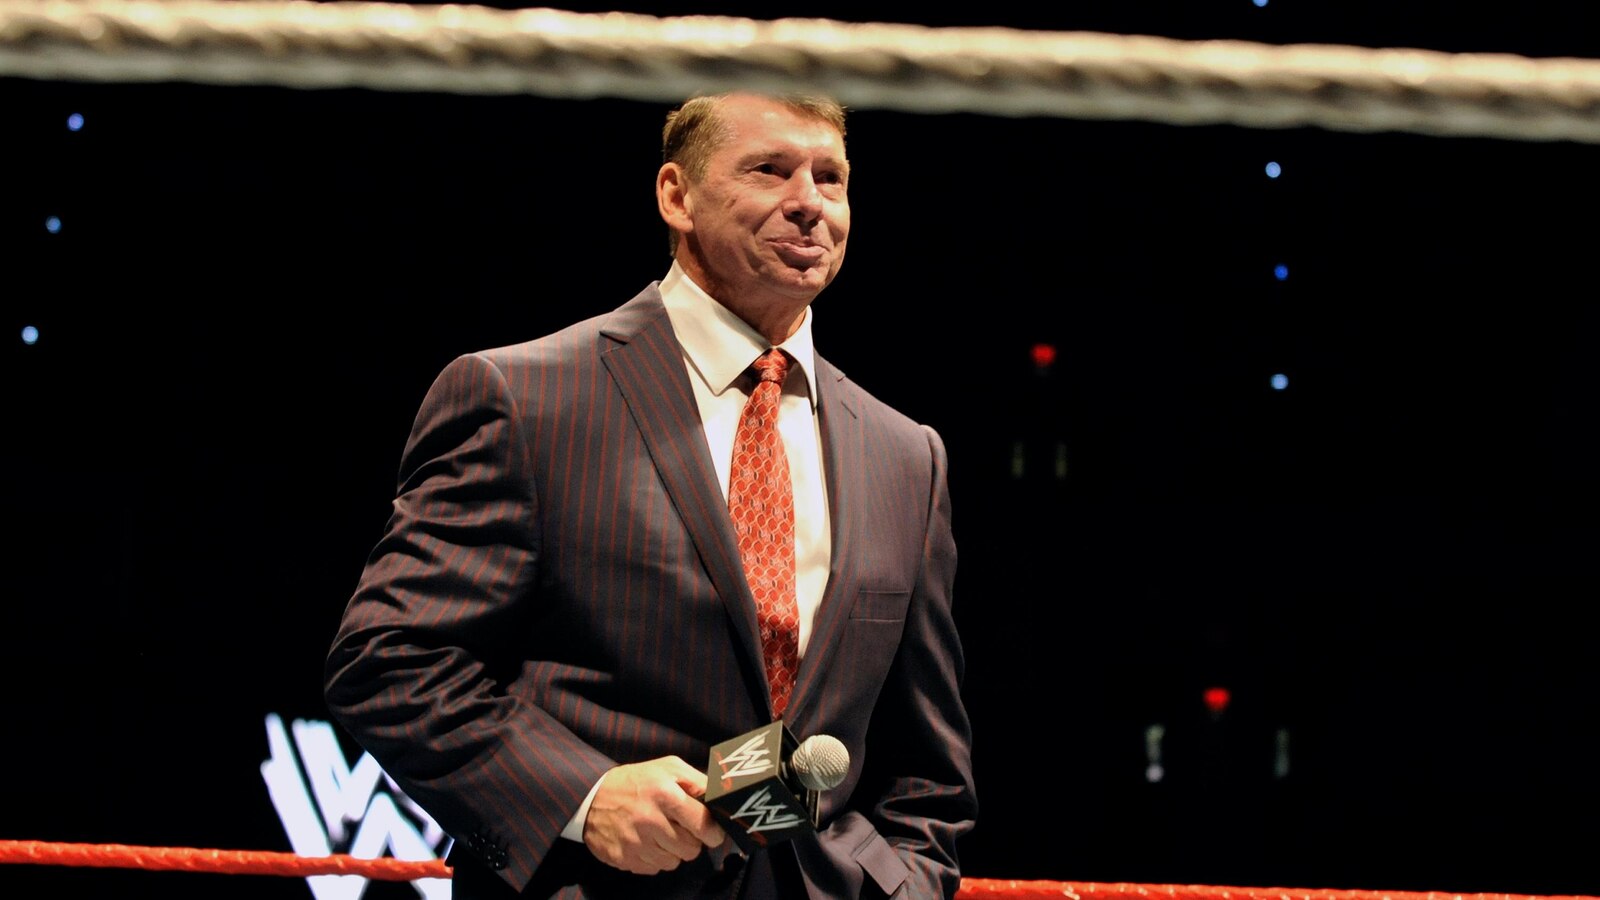 Vince McMahon, Wrestling Icon, Steps Down from WWE Following Sexual Abuse Lawsuit by Former Employee